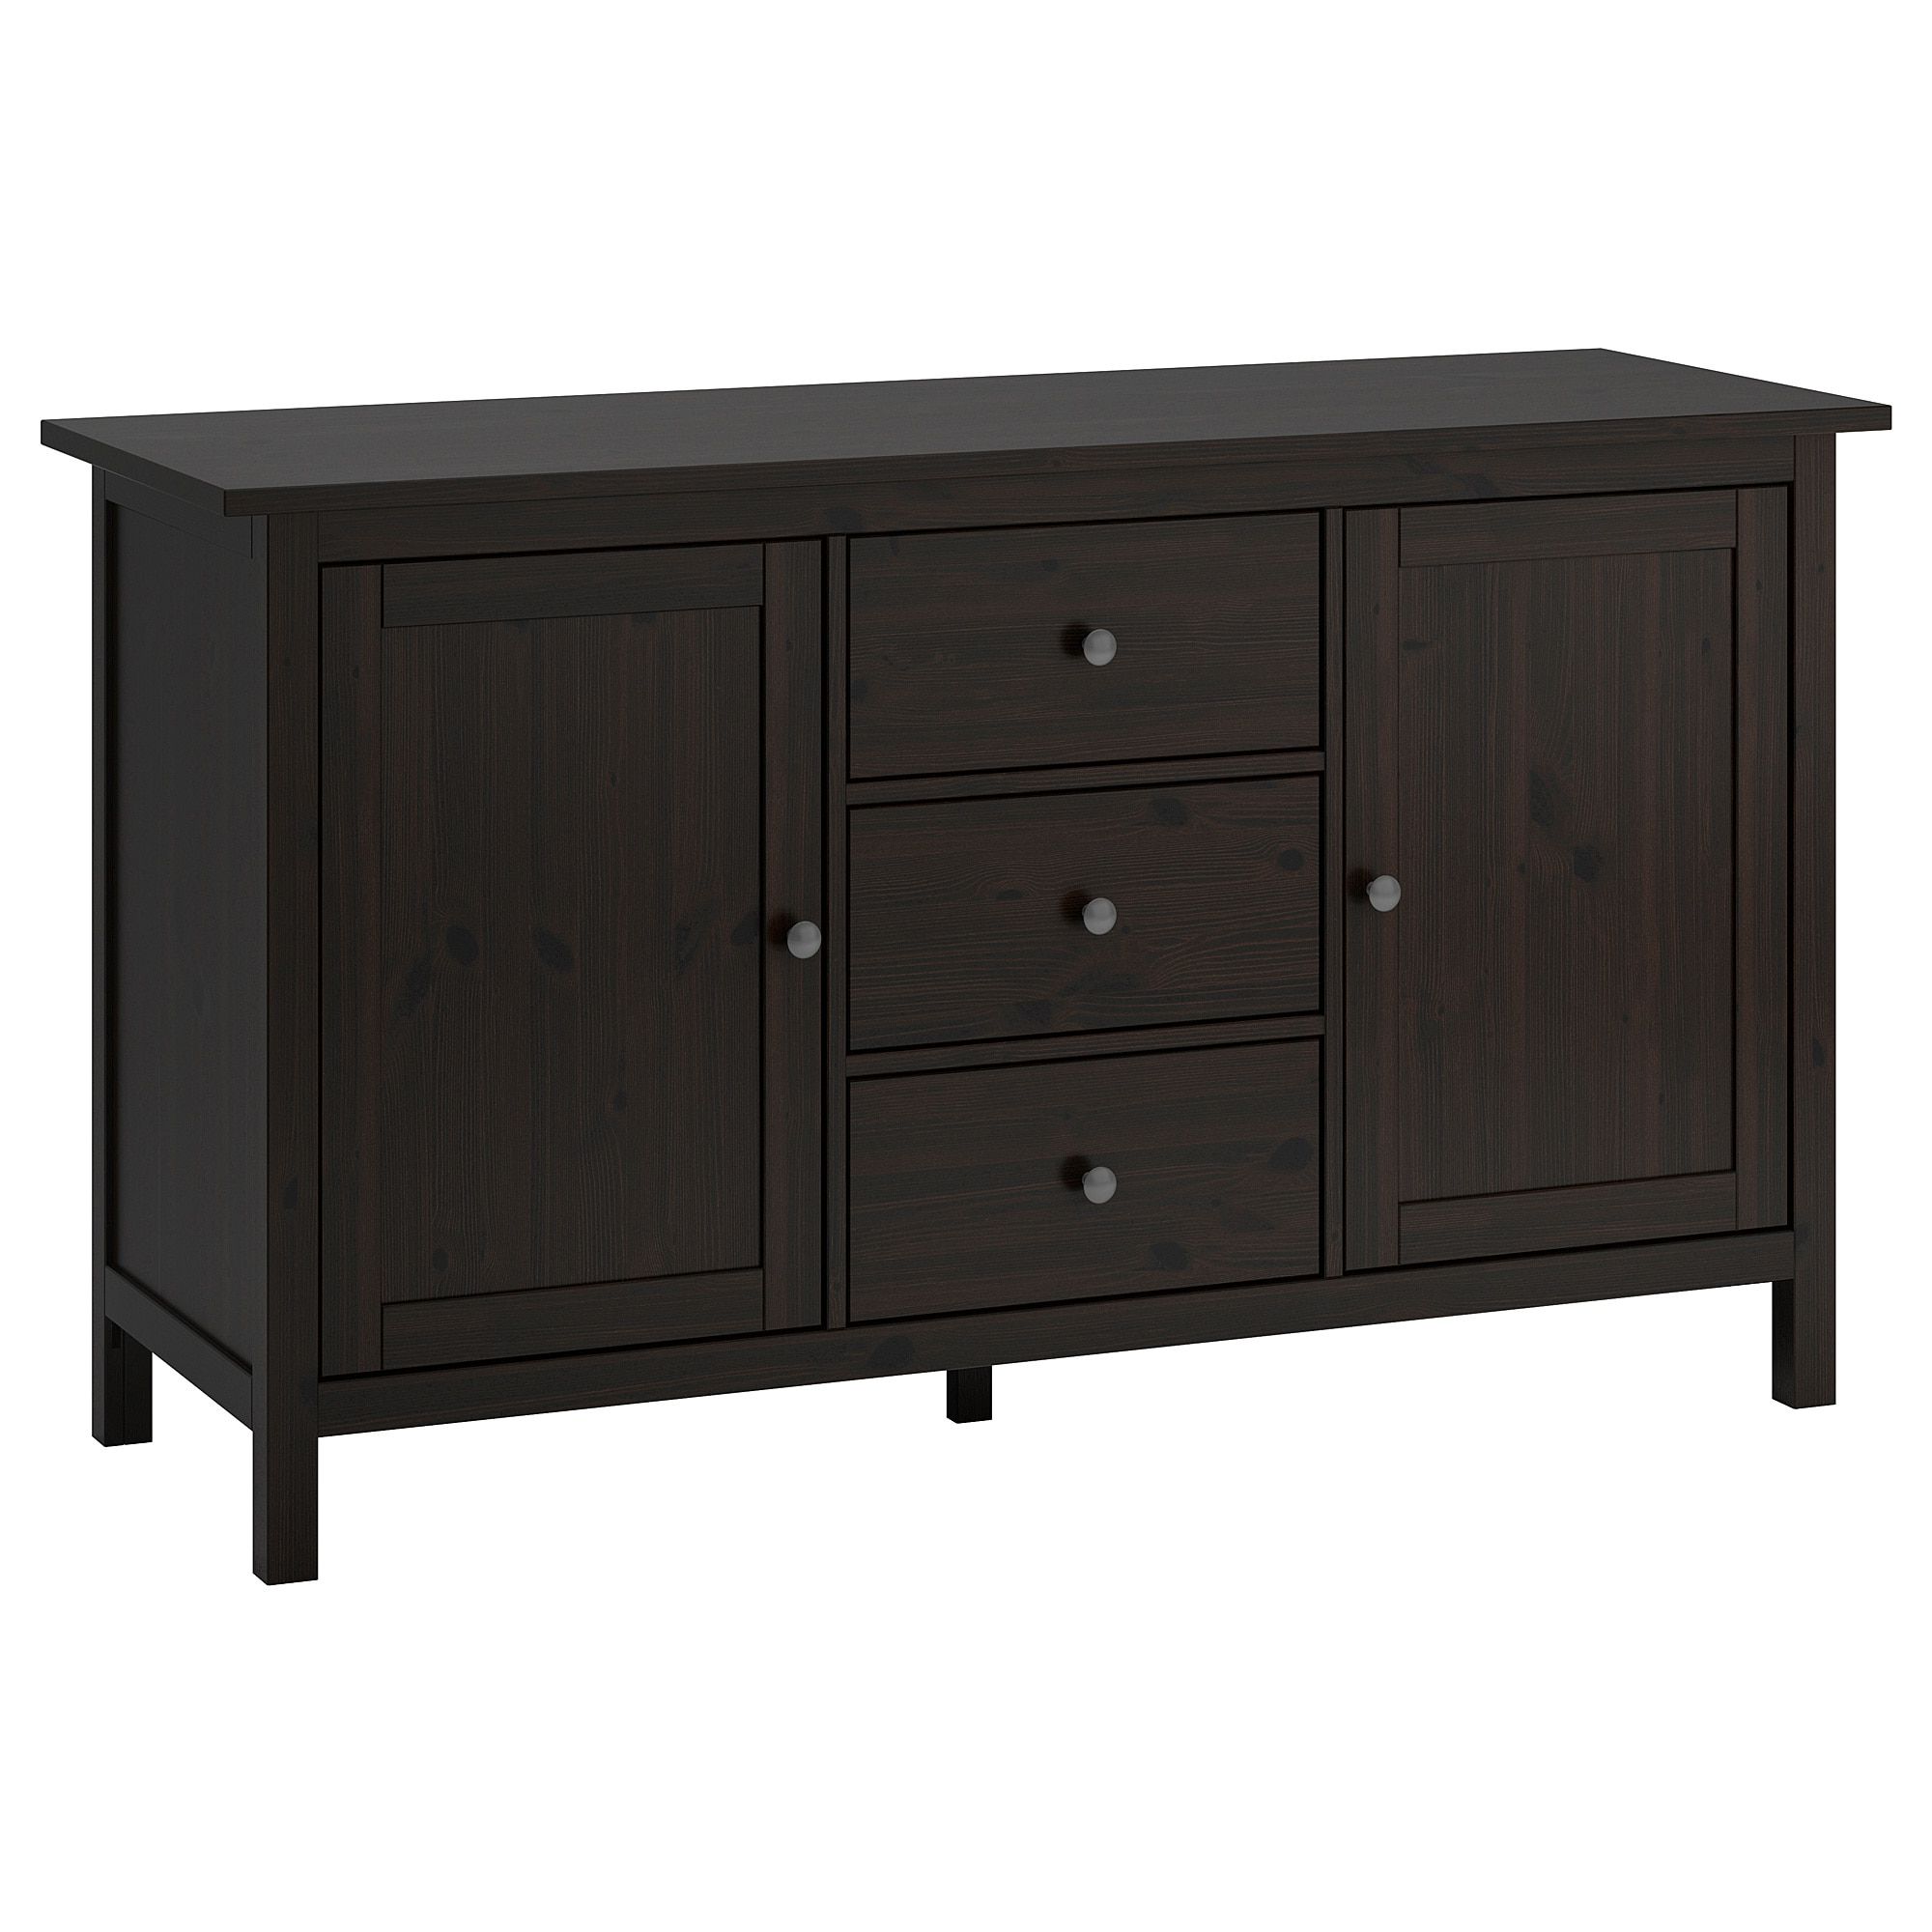 Natural South Pine Sideboards With Latest Hemnes Sideboard – Black Brown – Ikea (View 18 of 20)